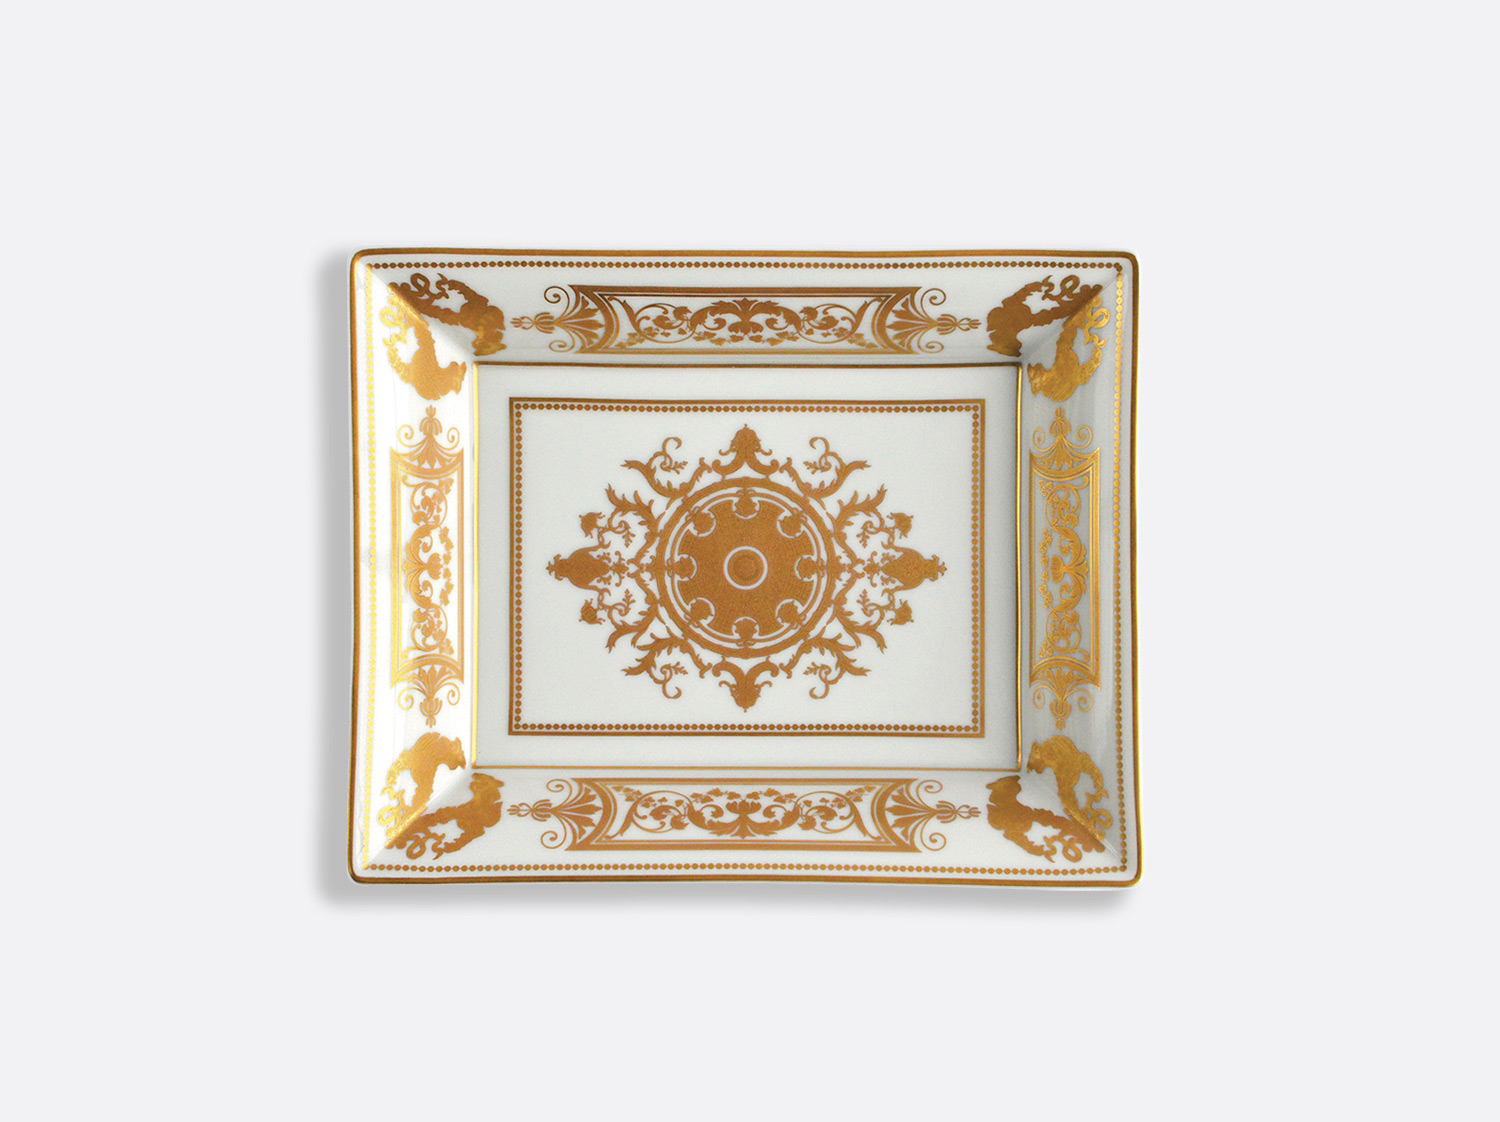 China Valet tray 7.9 x 6.3" of the collection Aux Rois Or | Bernardaud